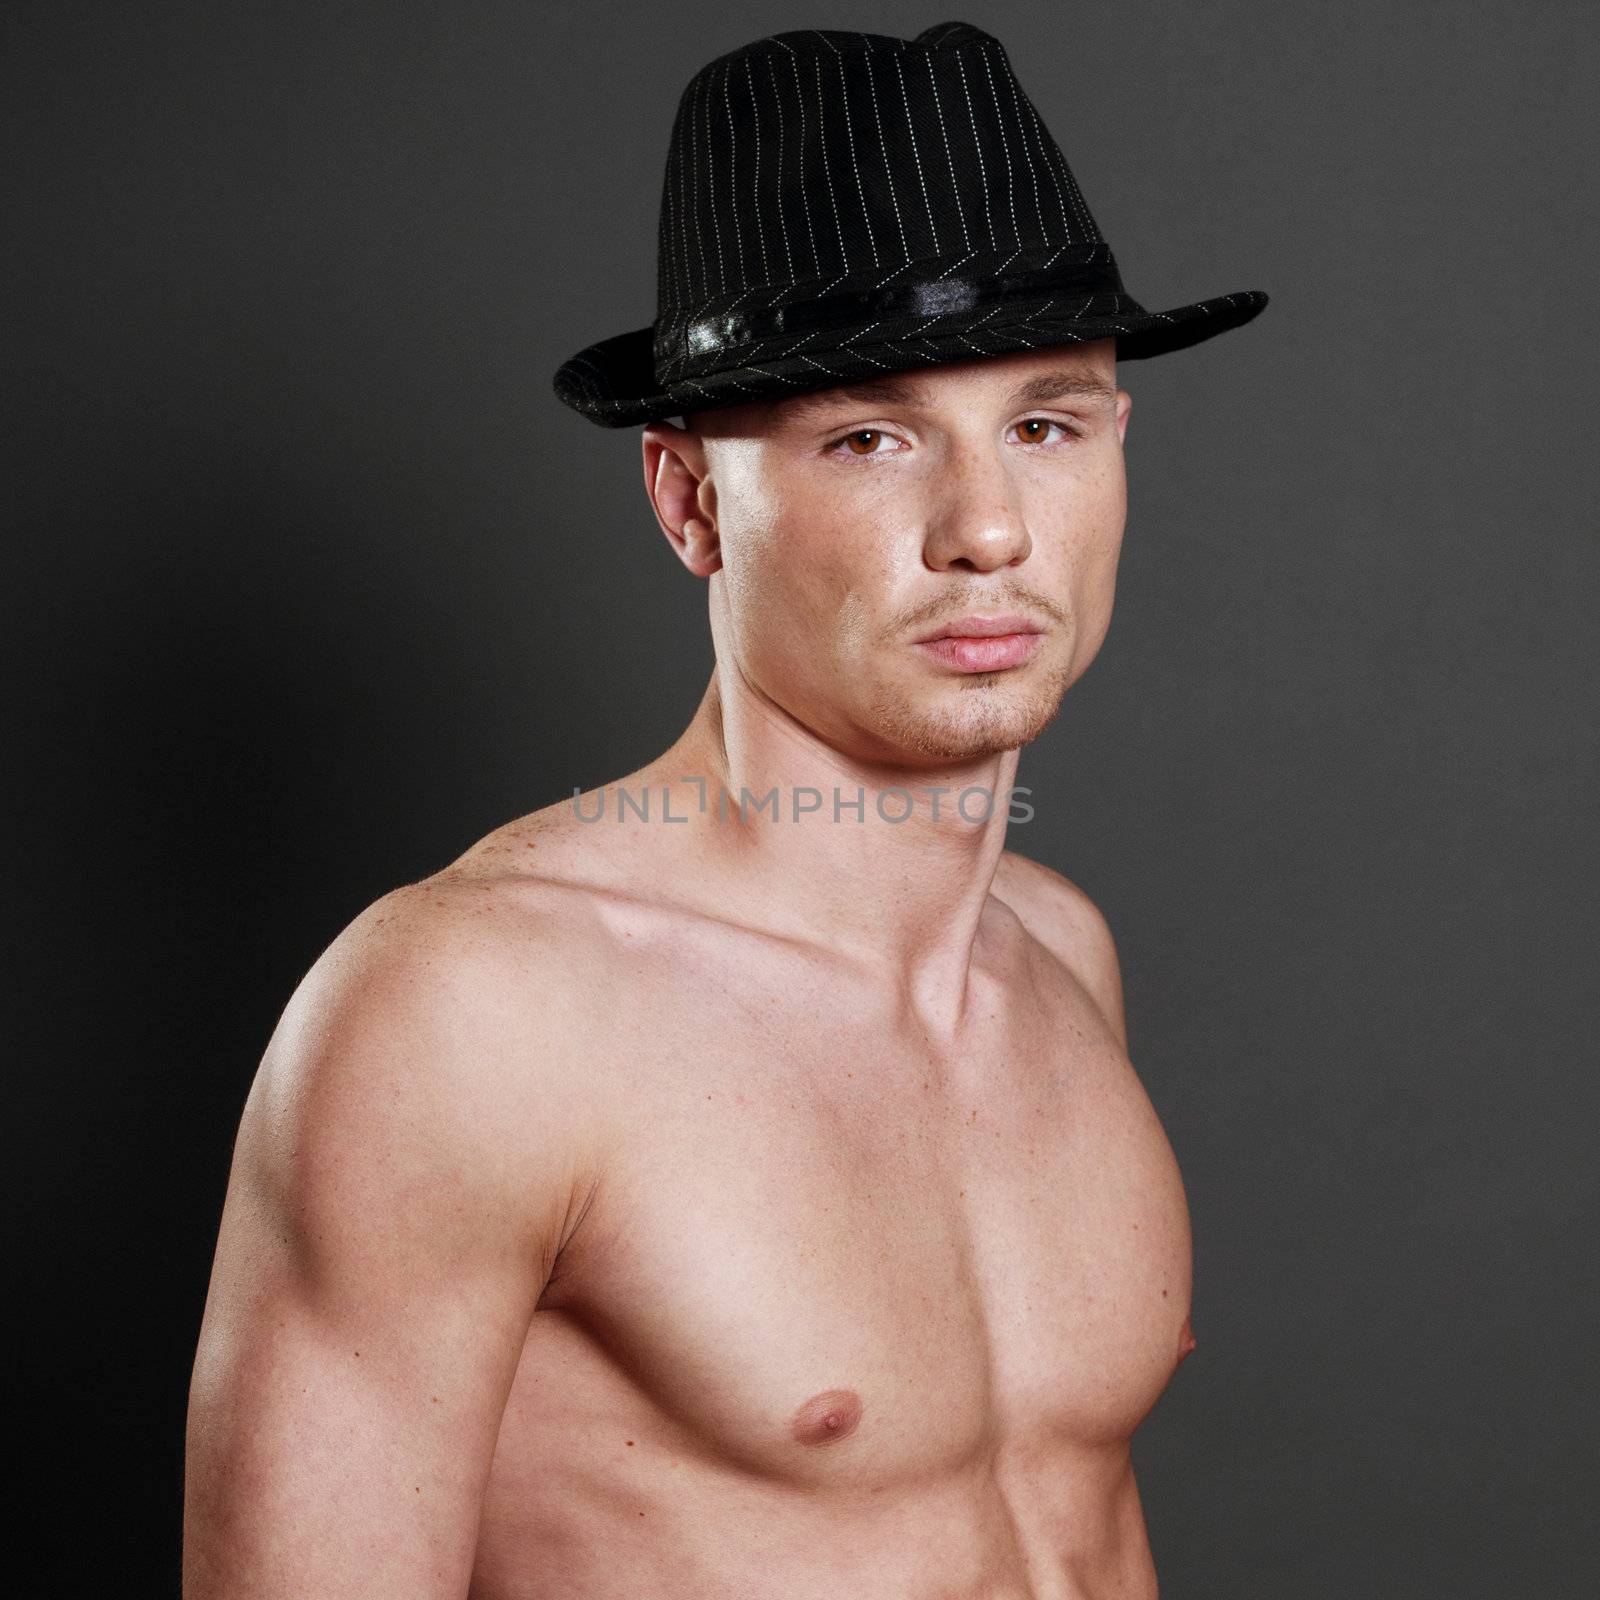 Studio portrait of young bald muscular man with black hat